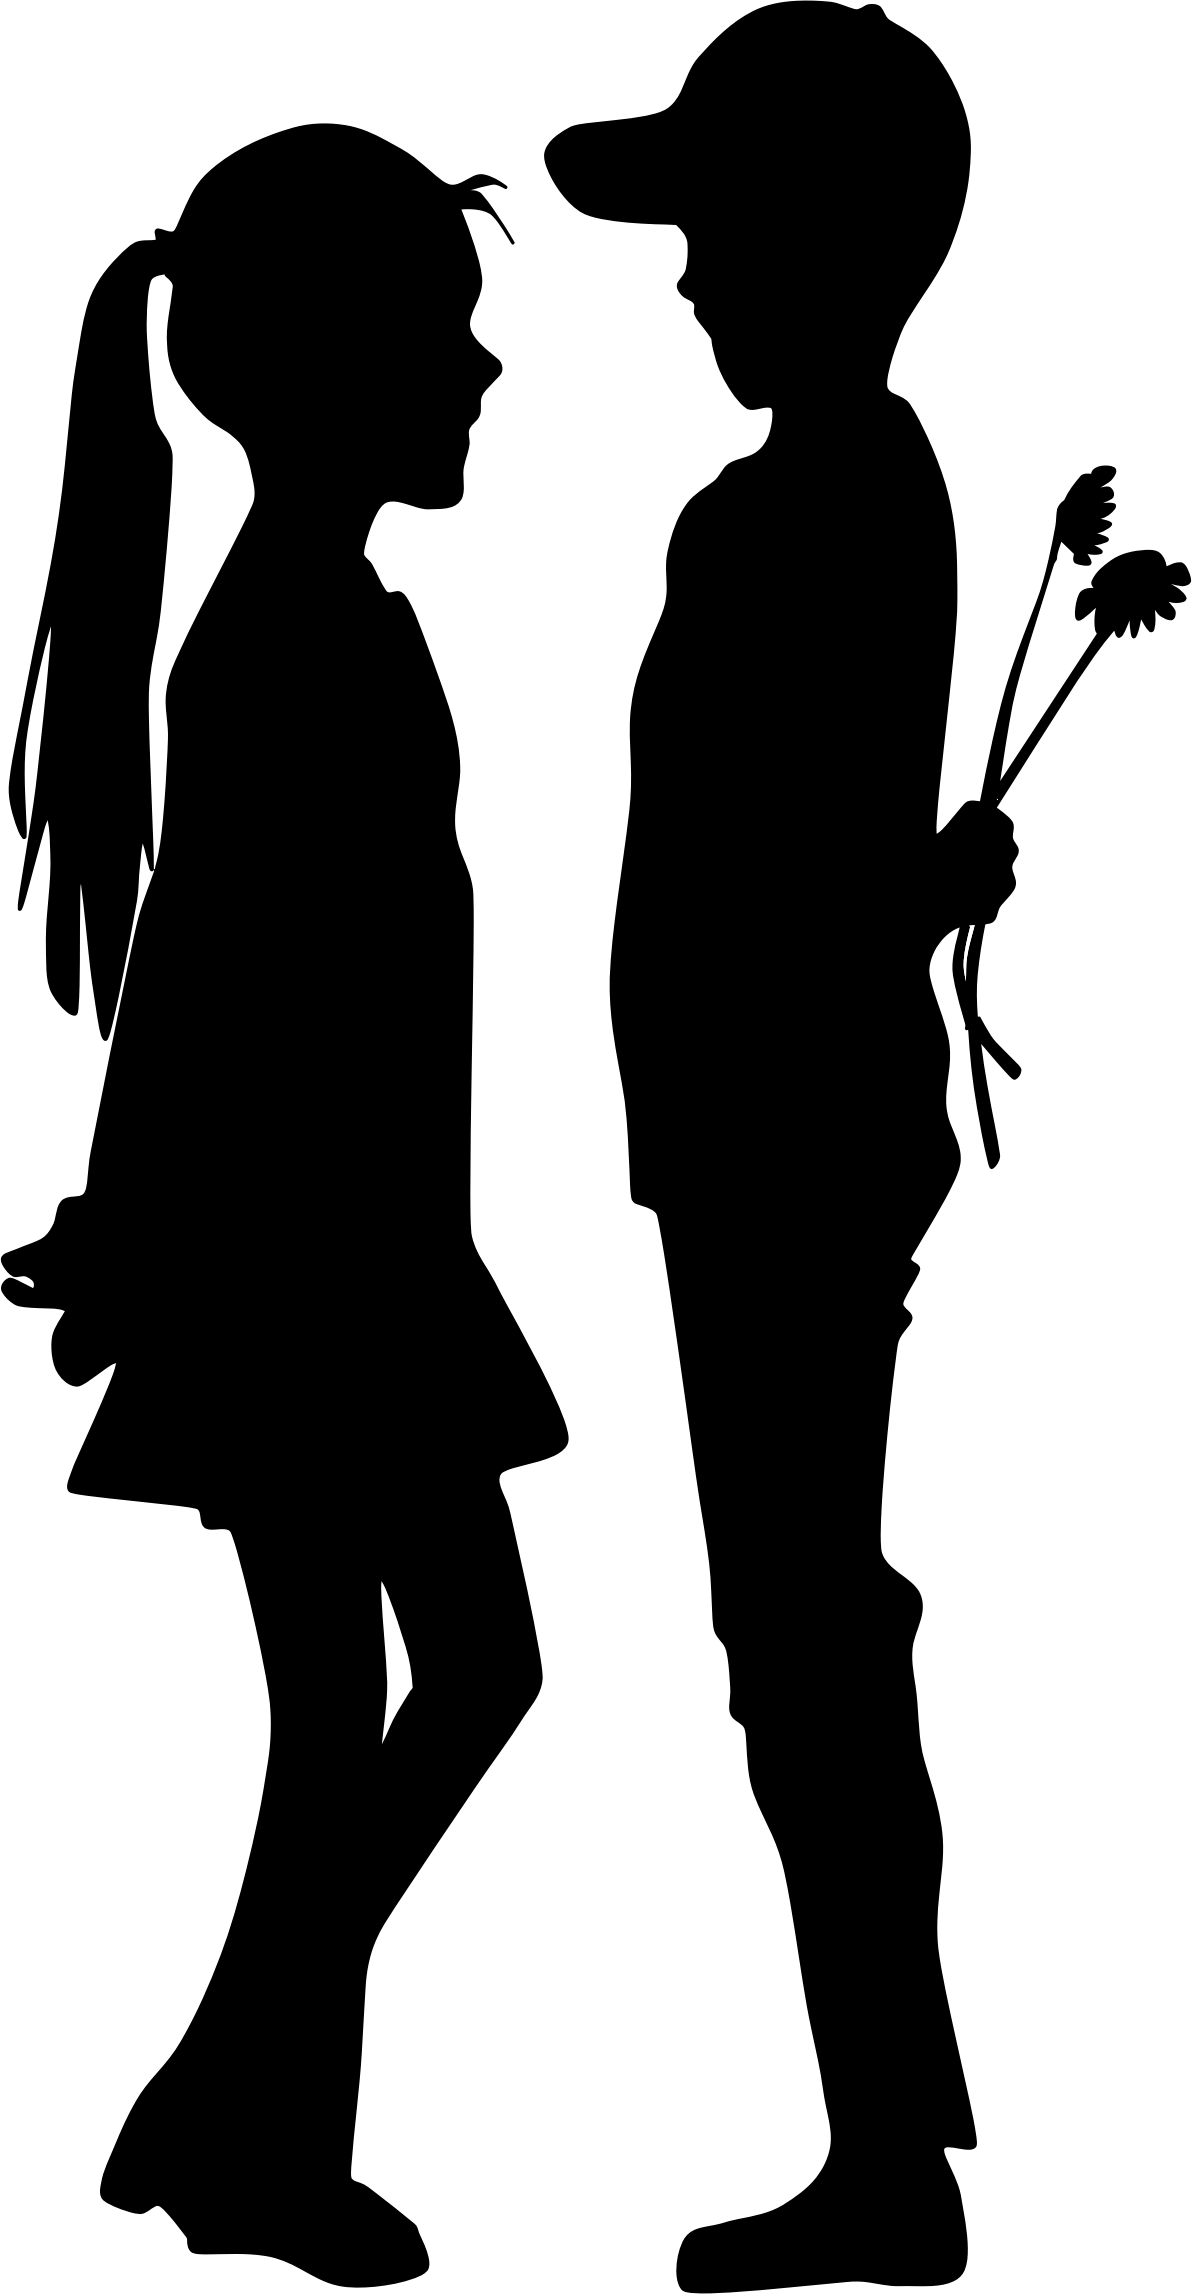 Clipart Giving Flowers To Girl Silhouette. Girl silhouette